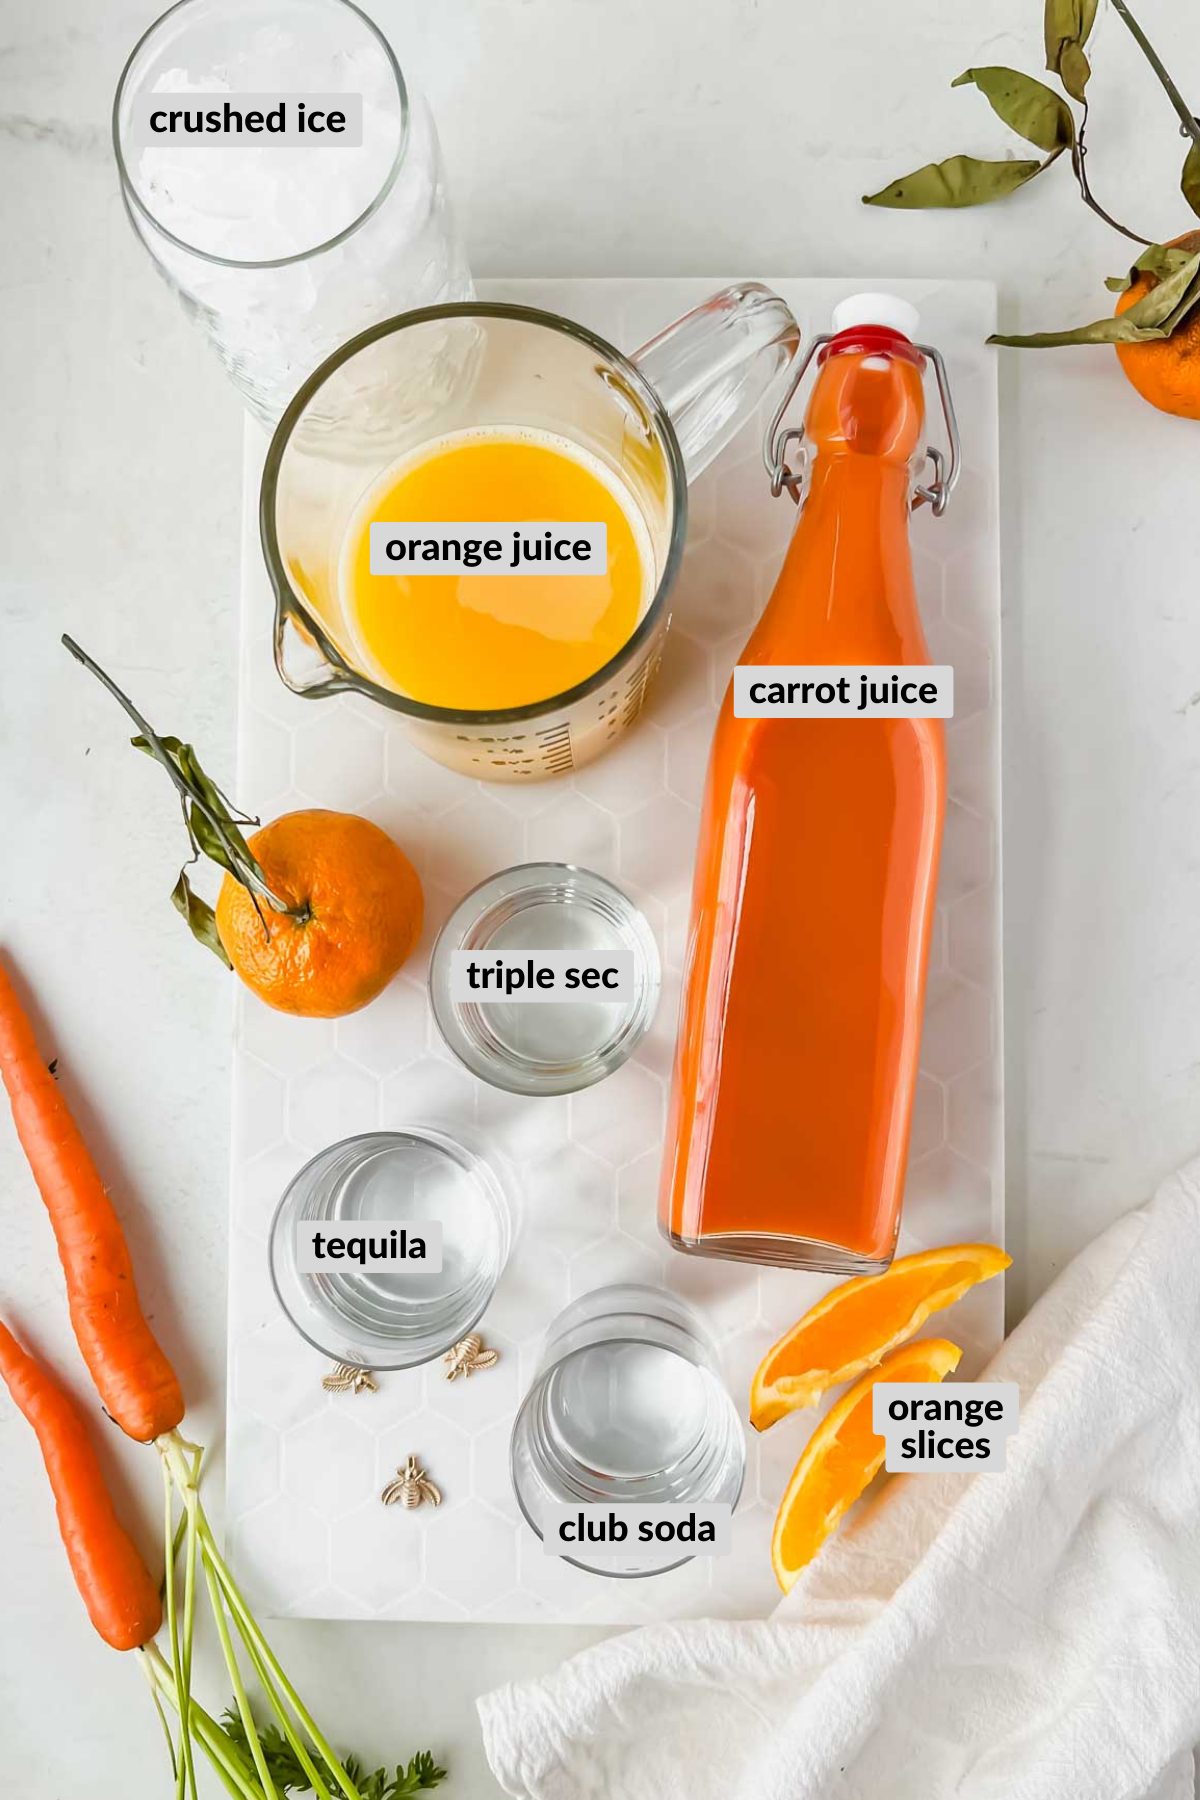 labeled carrot margarita ingredients spread on white background.